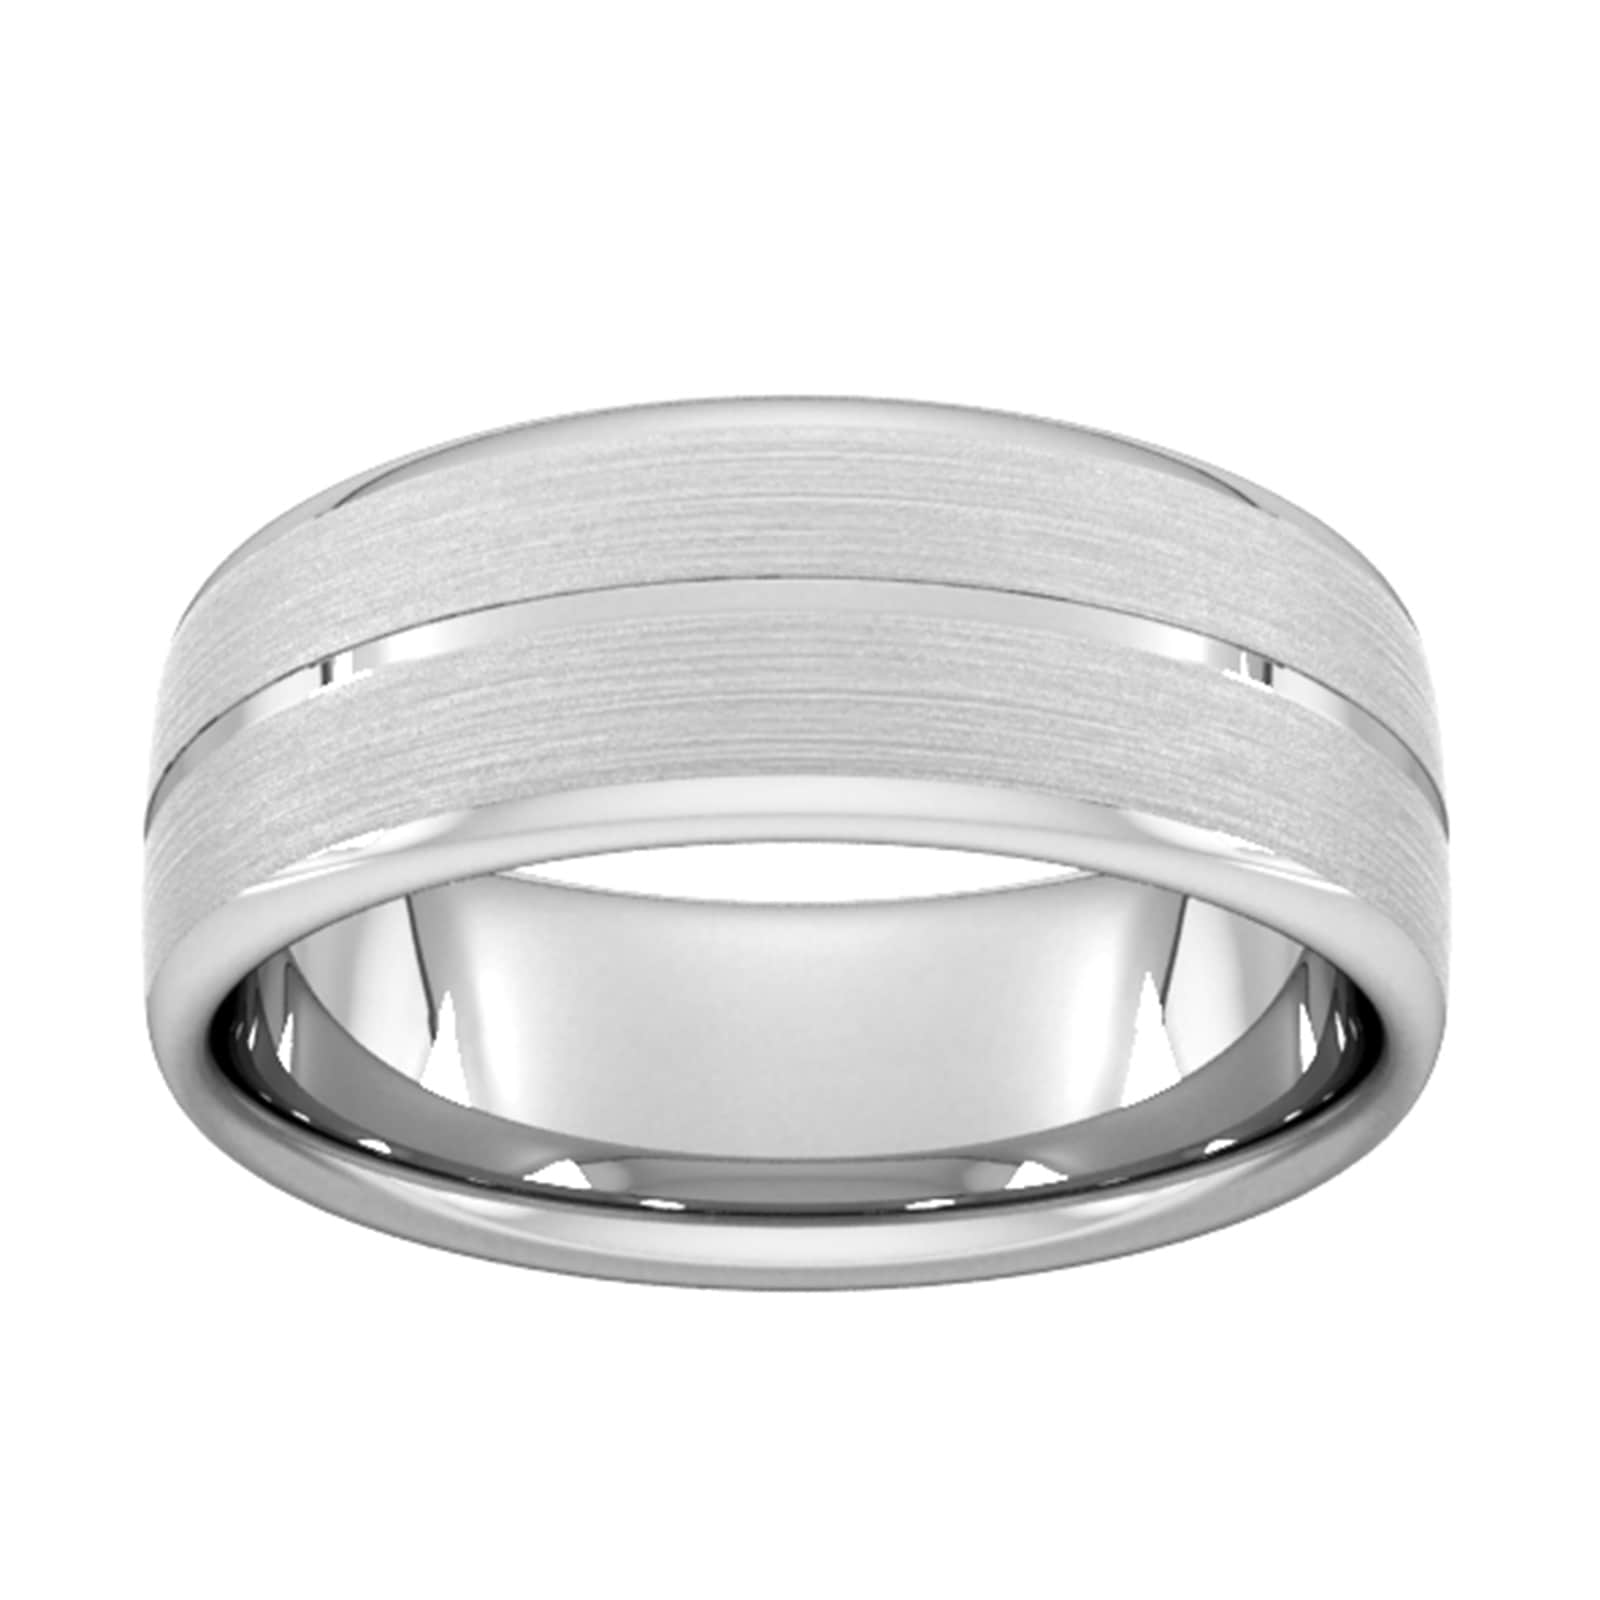 8mm Flat Court Heavy Centre Groove With Chamfered Edge Wedding Ring In 9 Carat White Gold - Ring Size Z